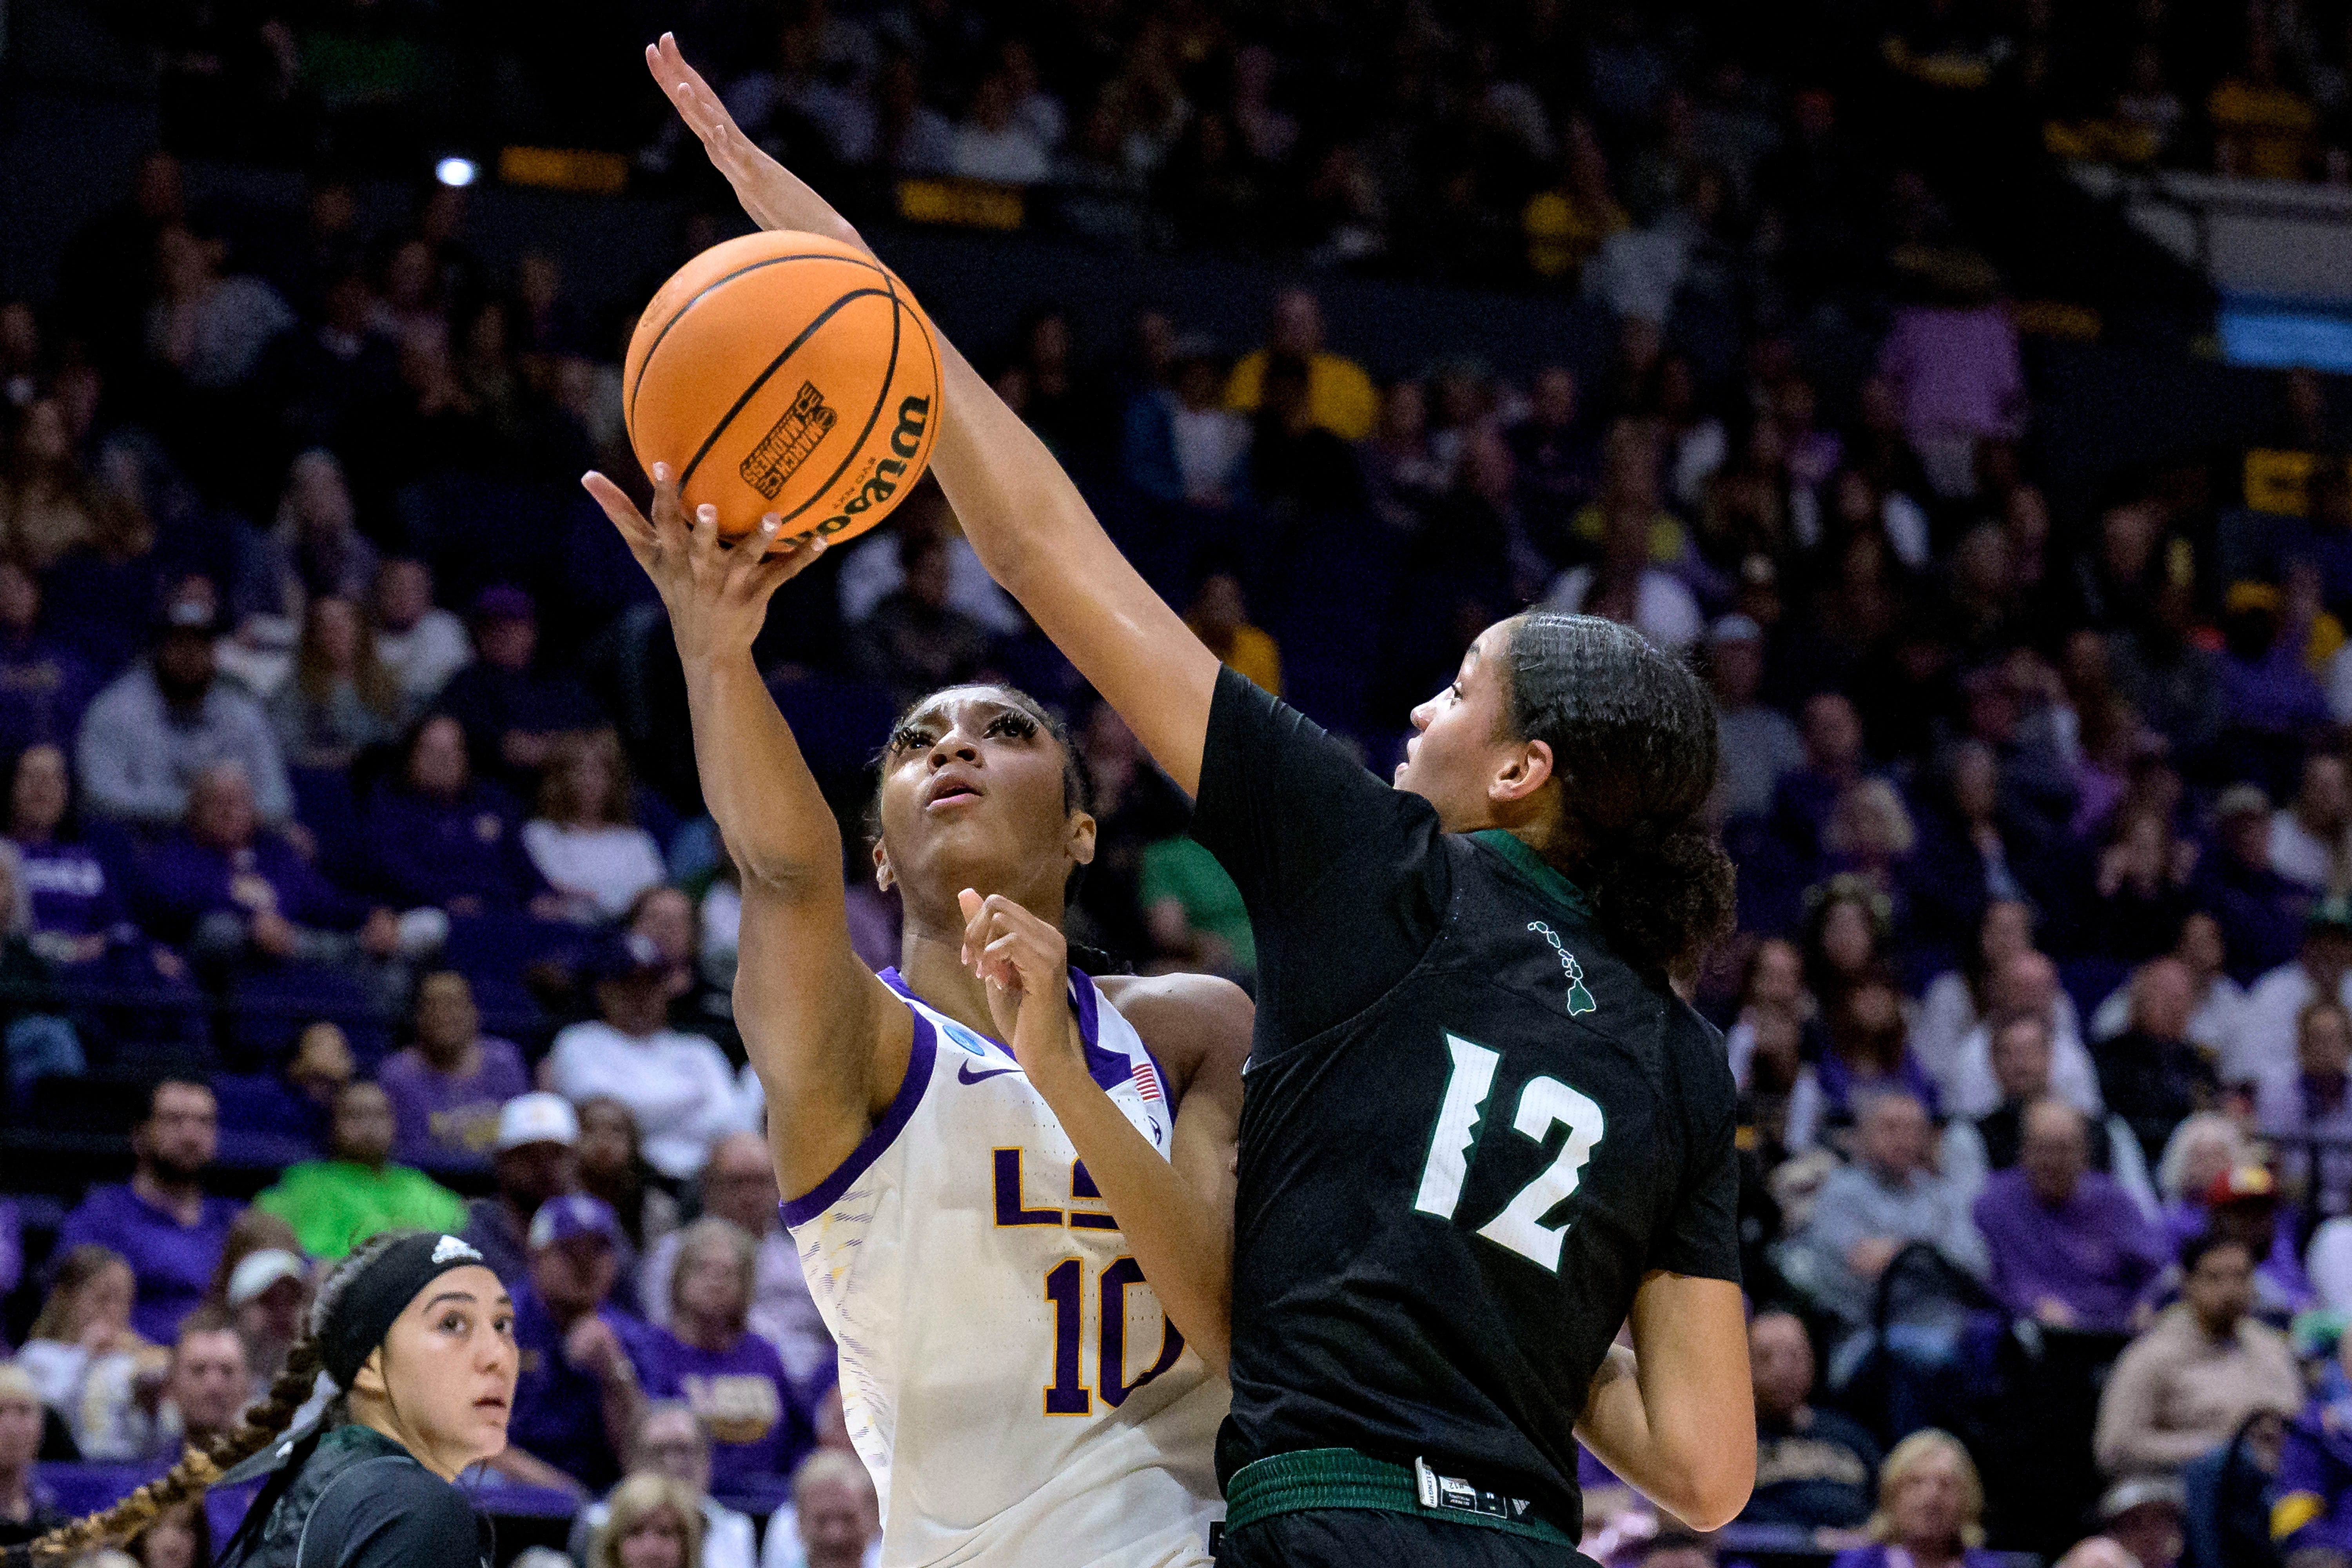 LSU forward Angel Reese (10) shoots against Hawaii forward Imani Perez (12) during the first half of a first-round college basketball game in the women's NCAA Tournament in Baton Rouge, La., Friday, March 17, 2023. (AP Photo/Matthew Hinton)